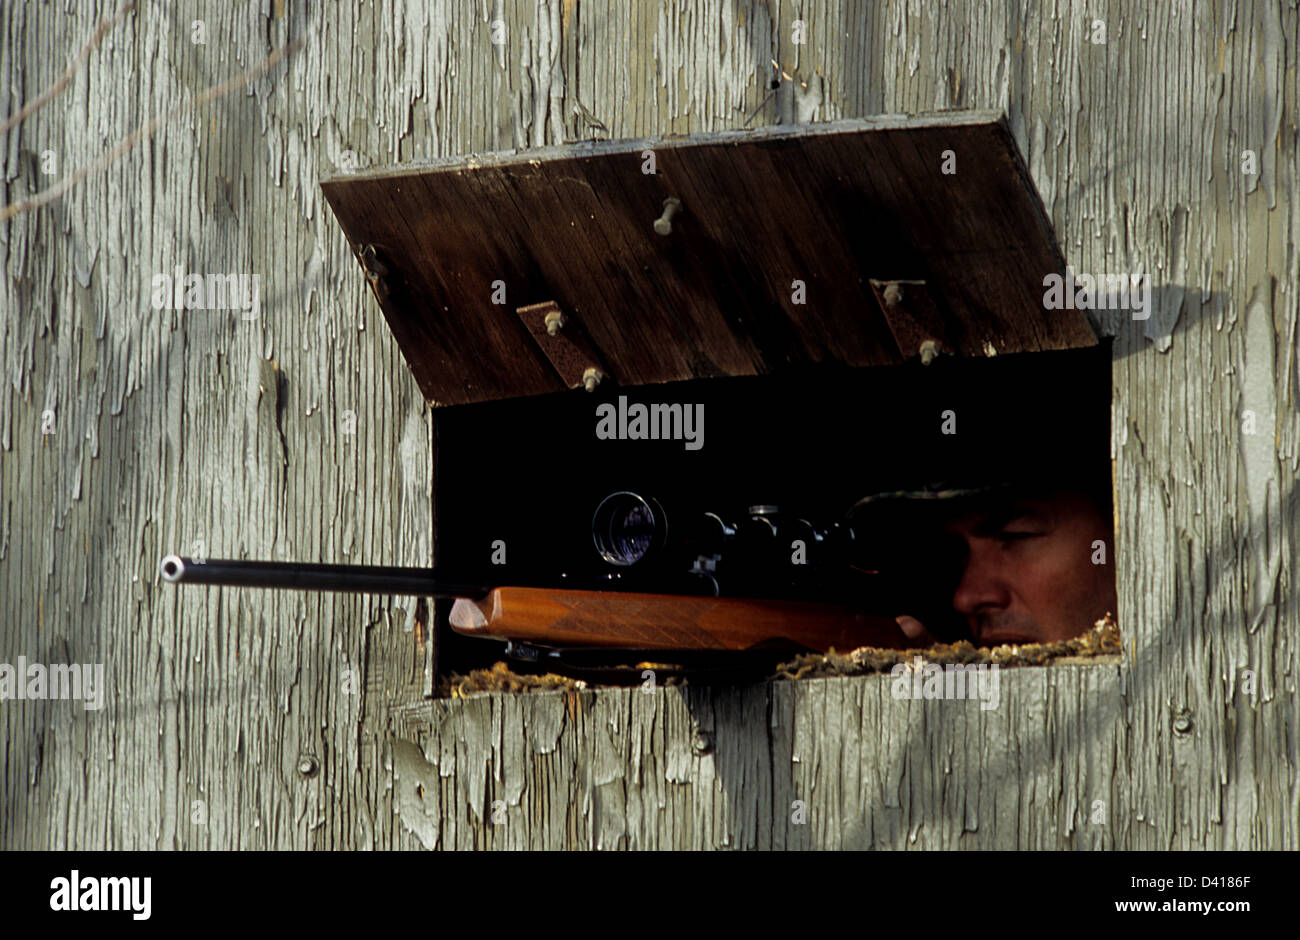 A South Texas whitetail deer hunter aiming his rifle from a tower blind ...